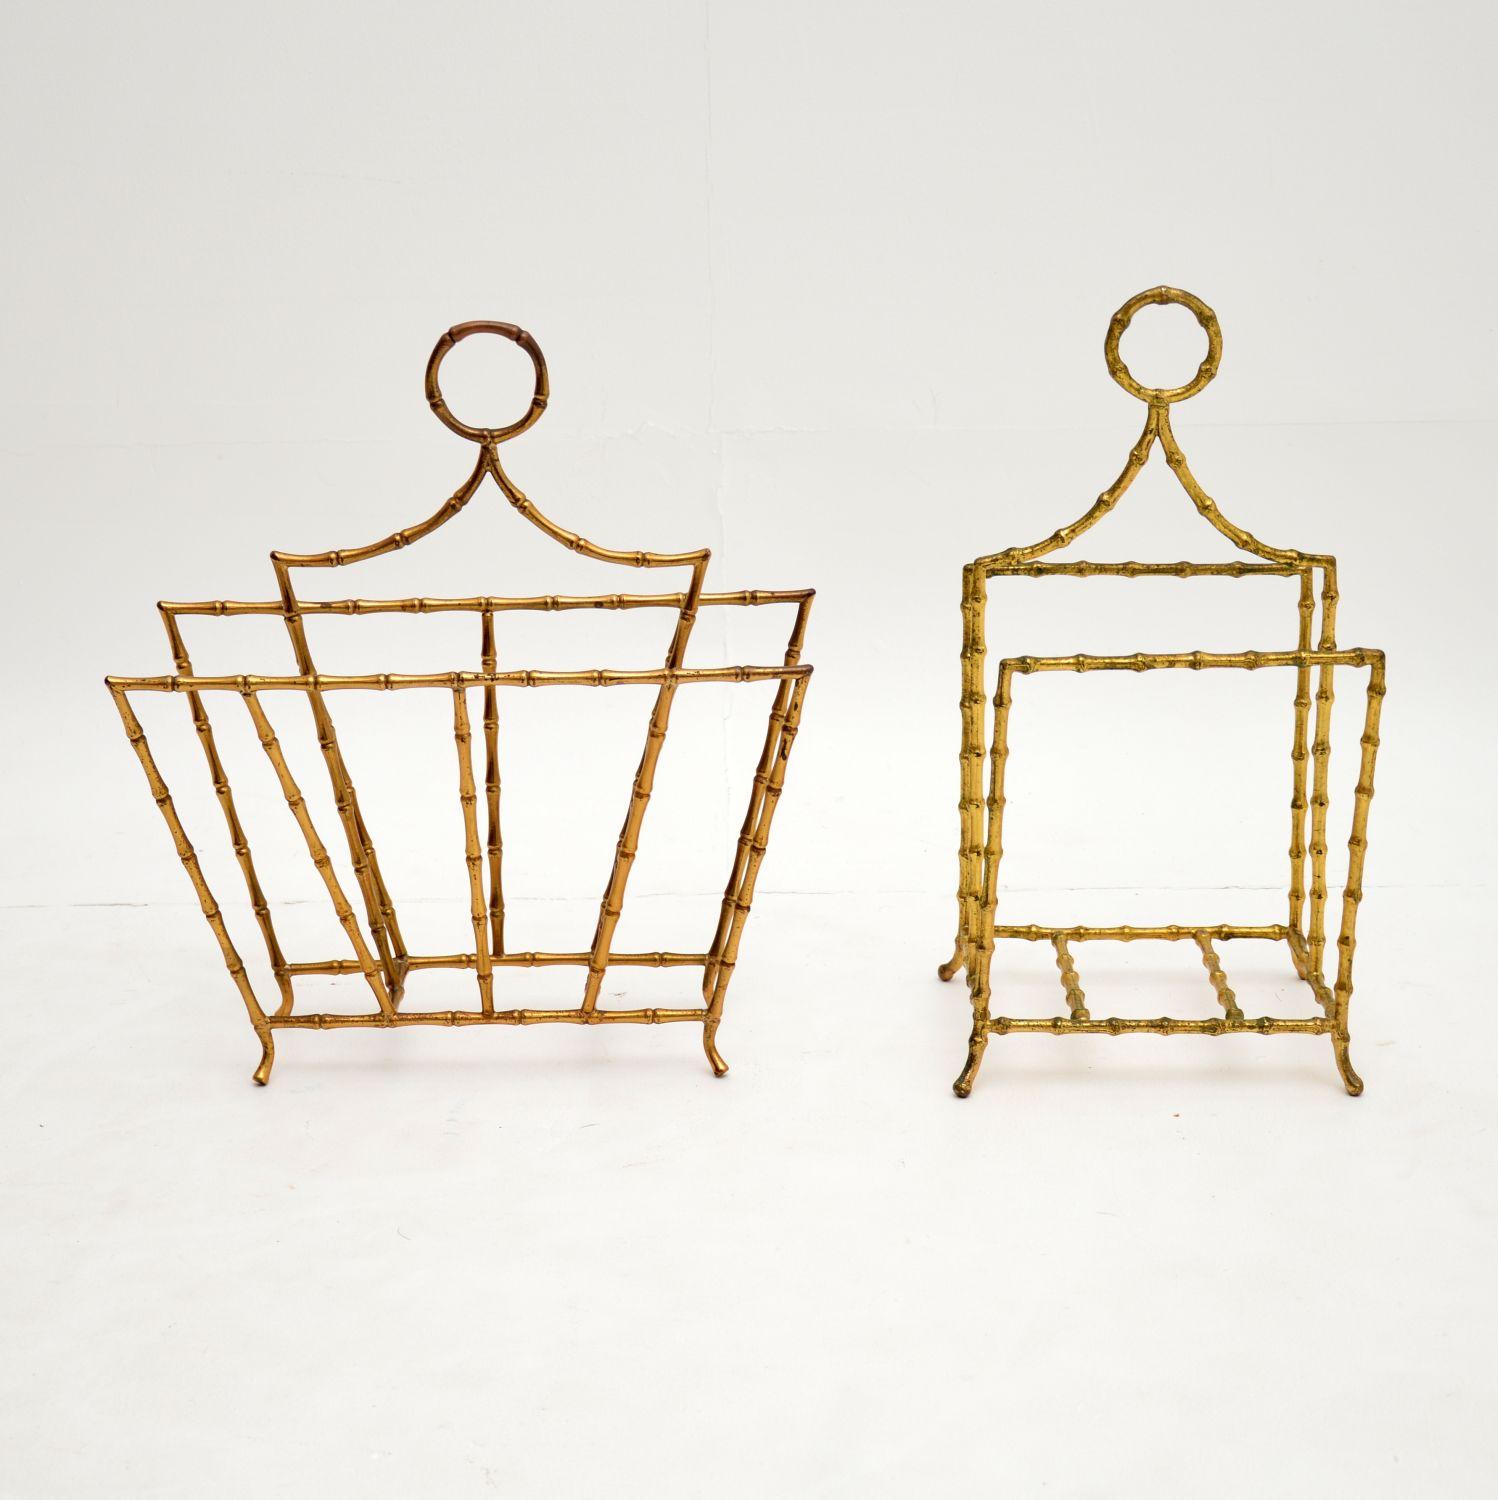 A stunning matched pair of solid brass paper racks in solid brass. These were made in France, they date from the 1950-60’s.

They are designed in faux bamboo look, and are of beautiful quality. These are very useful, intended for magazine /